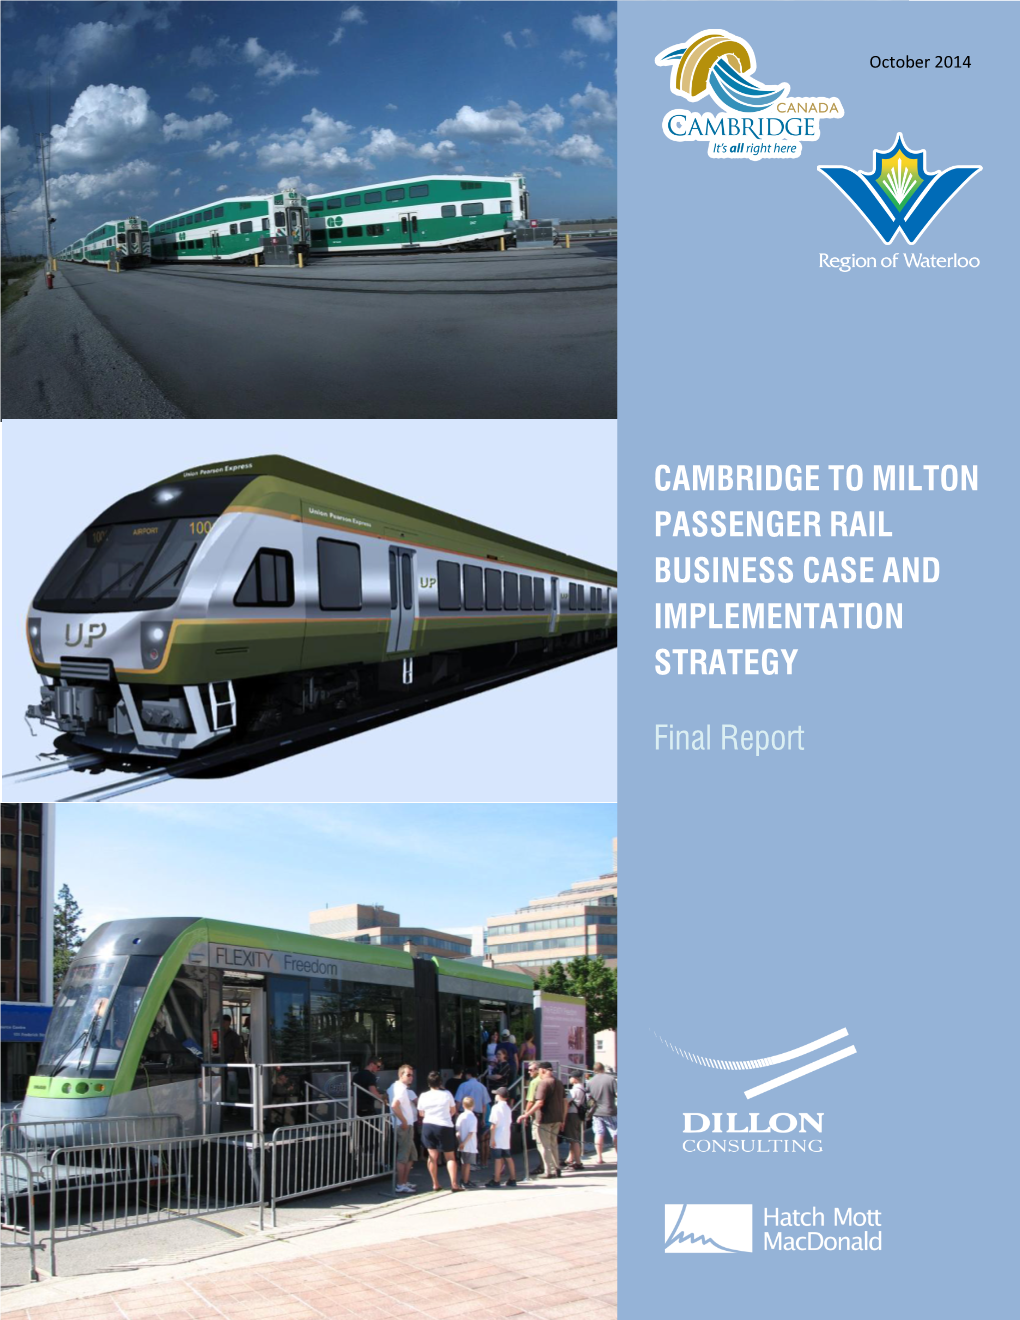 Cambridge to Milton Passenger Rail Business Case and Implementation Strategy